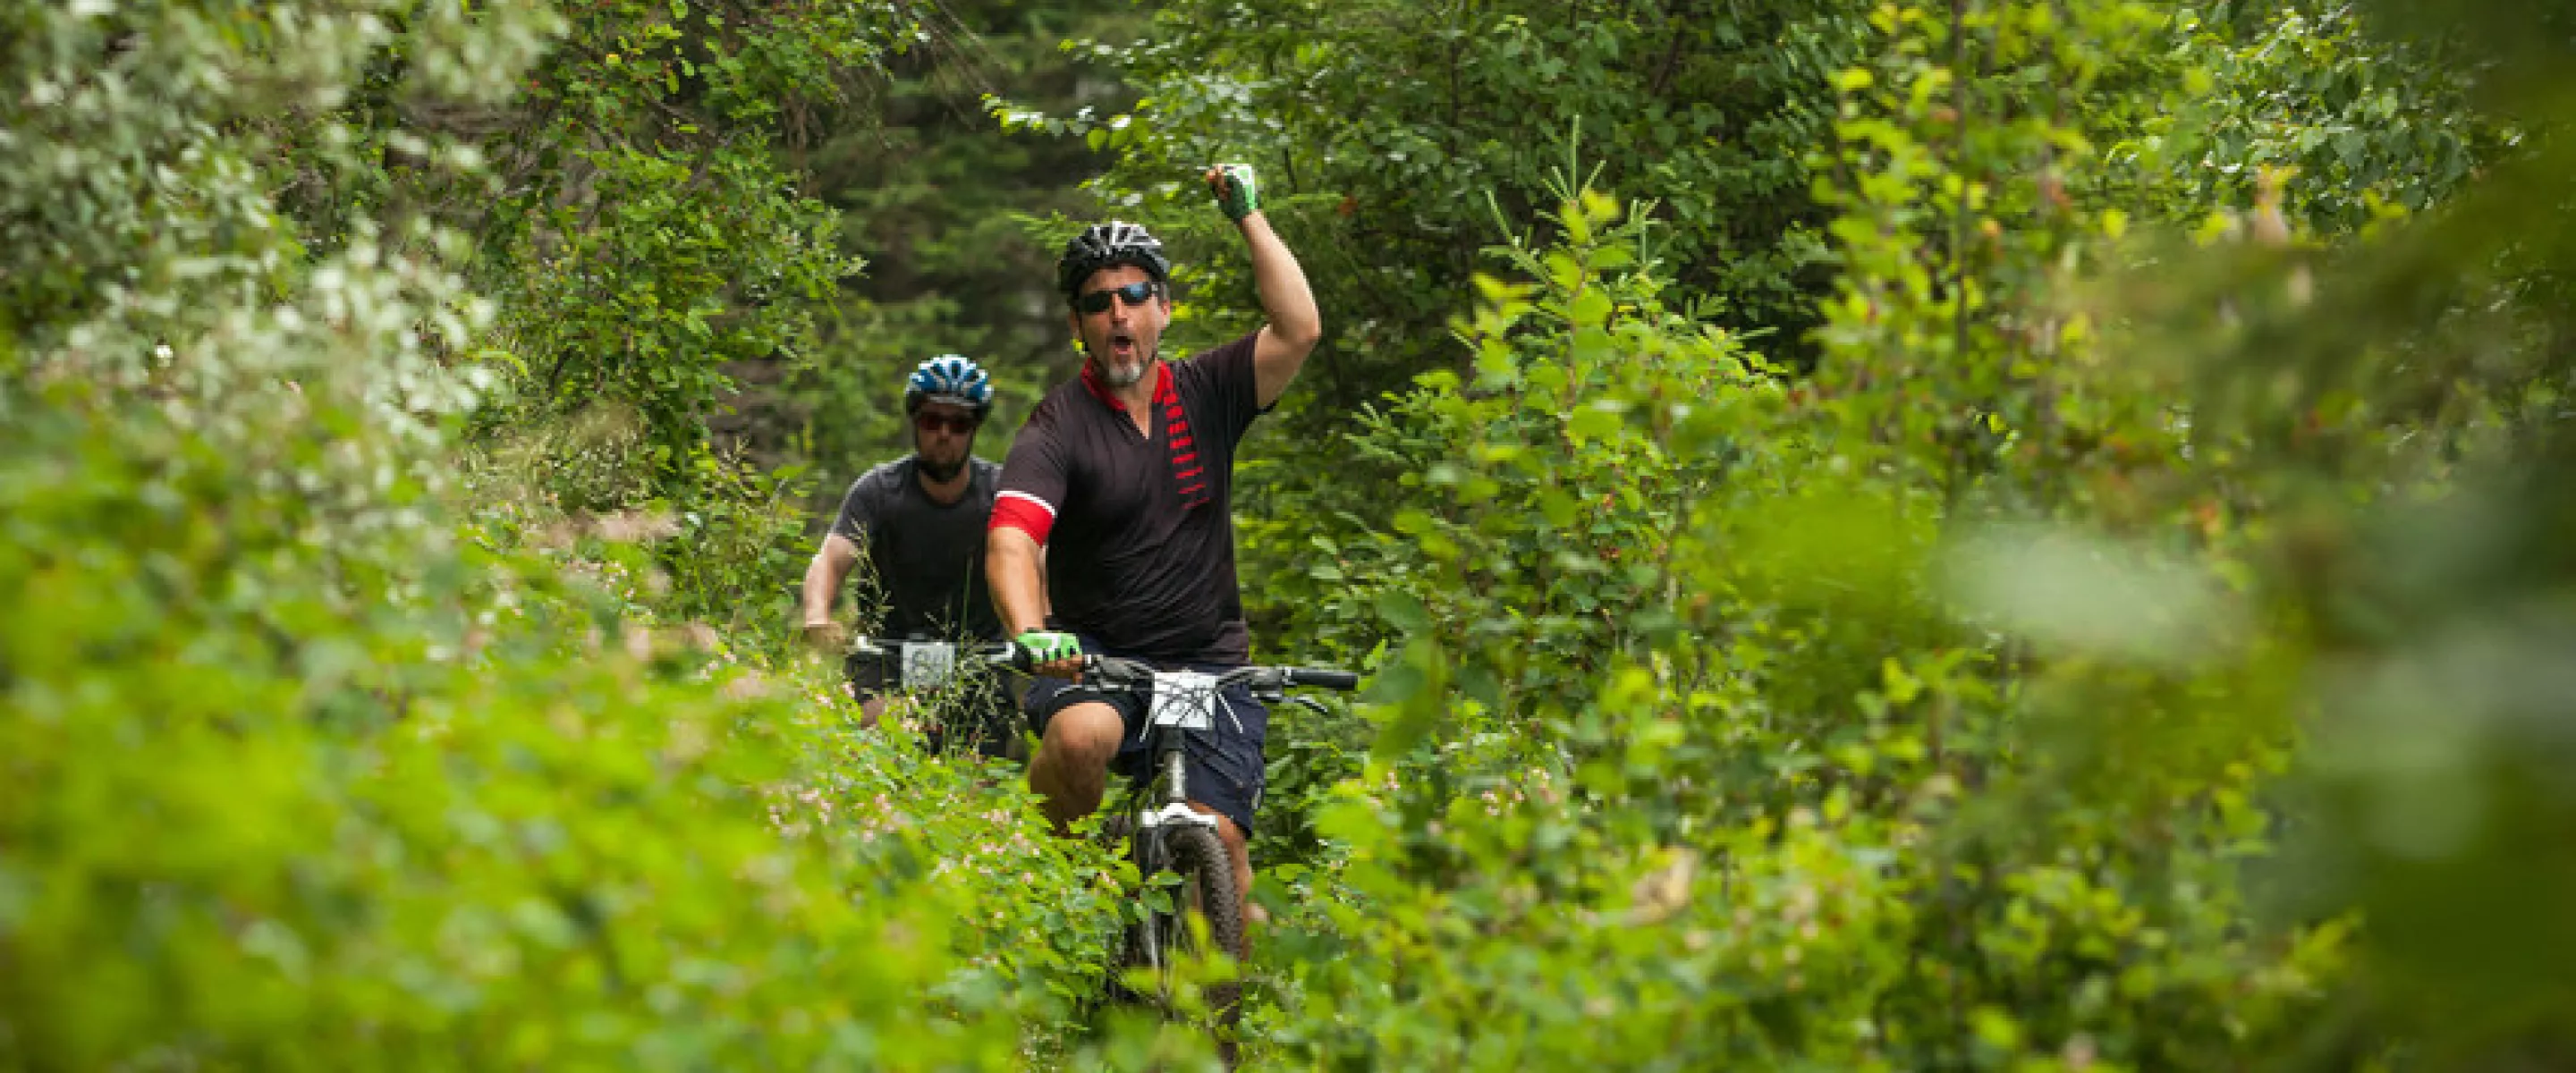 Duane Steiner on the Clear Lake Trail.

On July 7, 2018 cyclists participated in Cycle Clear Lake, an annual volunteer-organized fundraiser for MCC. Cyclists complete a 35 km trail ride around Clear